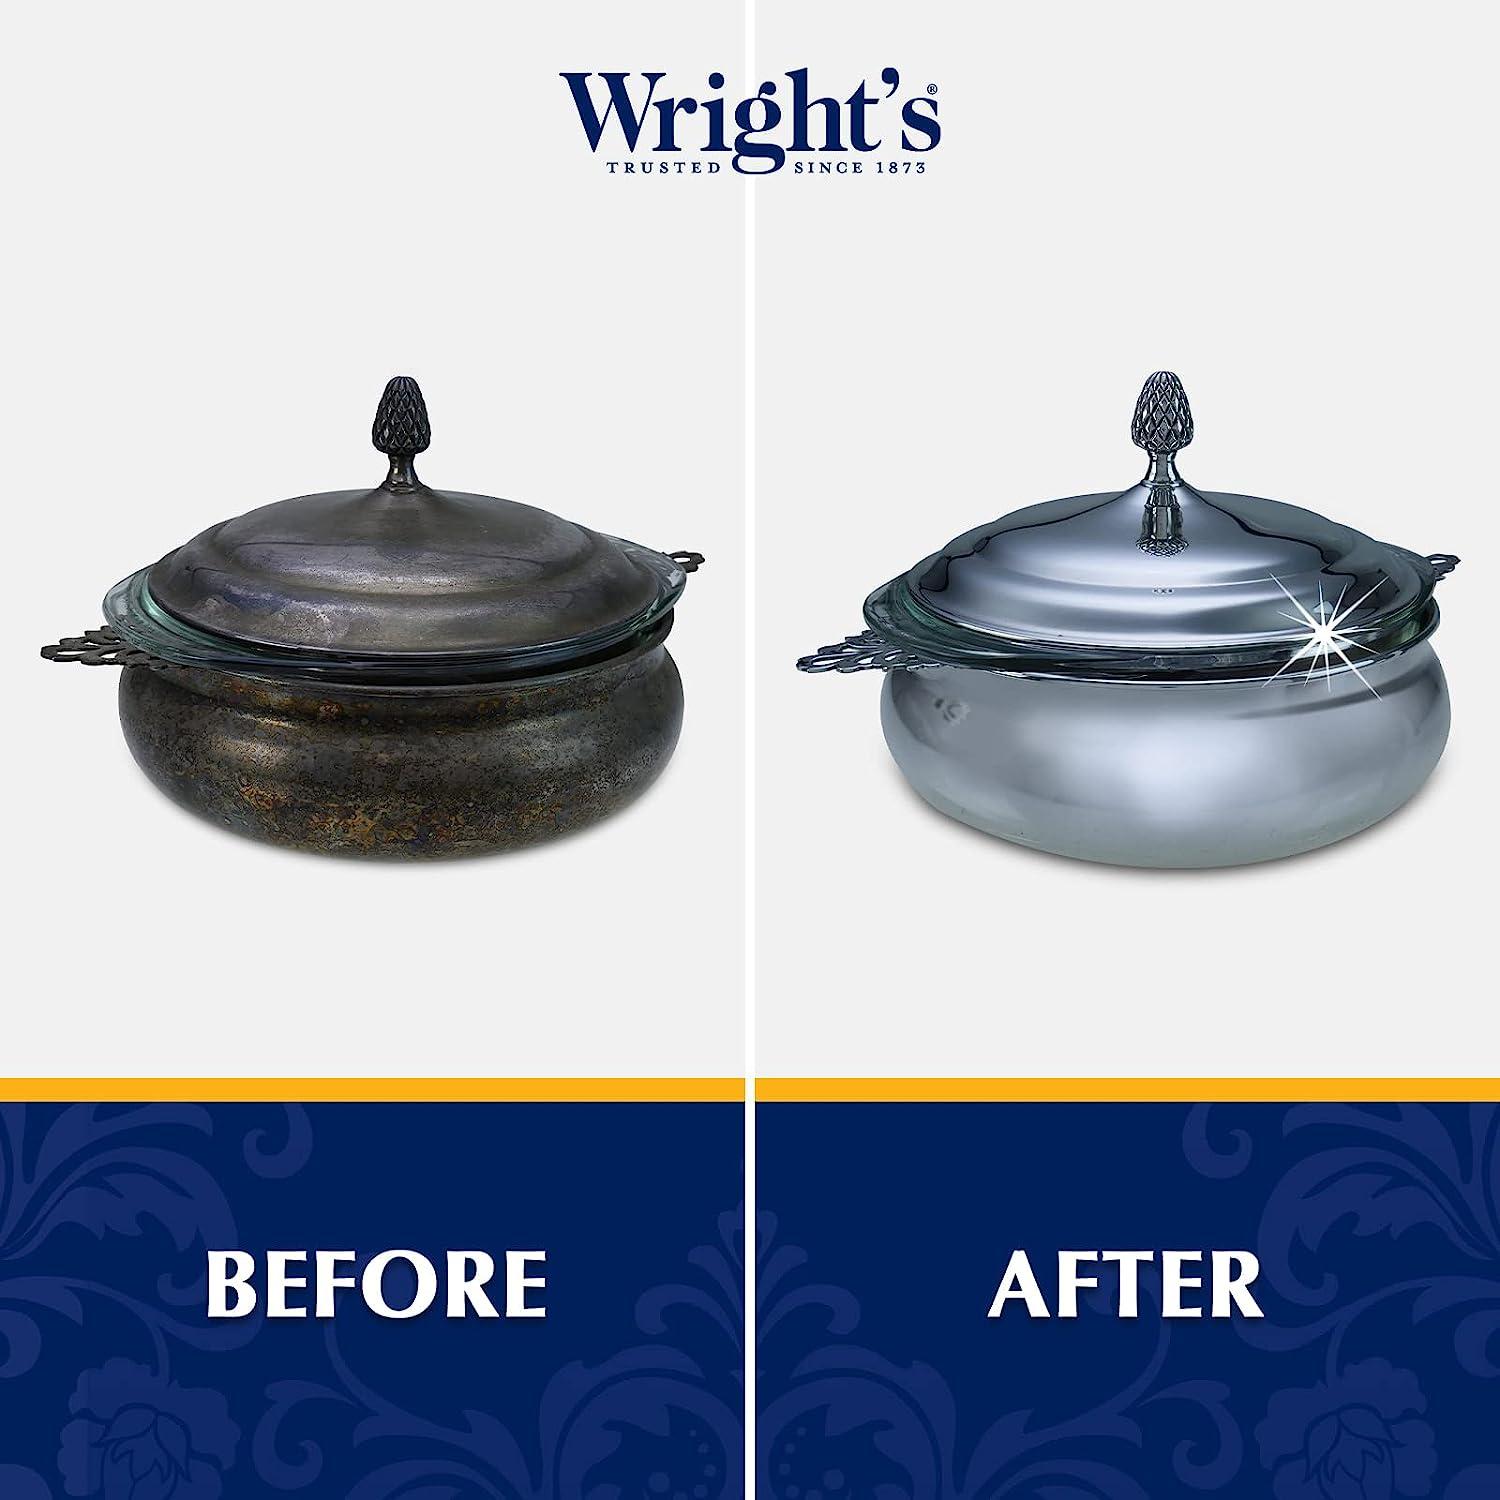 Why People Love Wright's Silver Cream for Polishing Silver